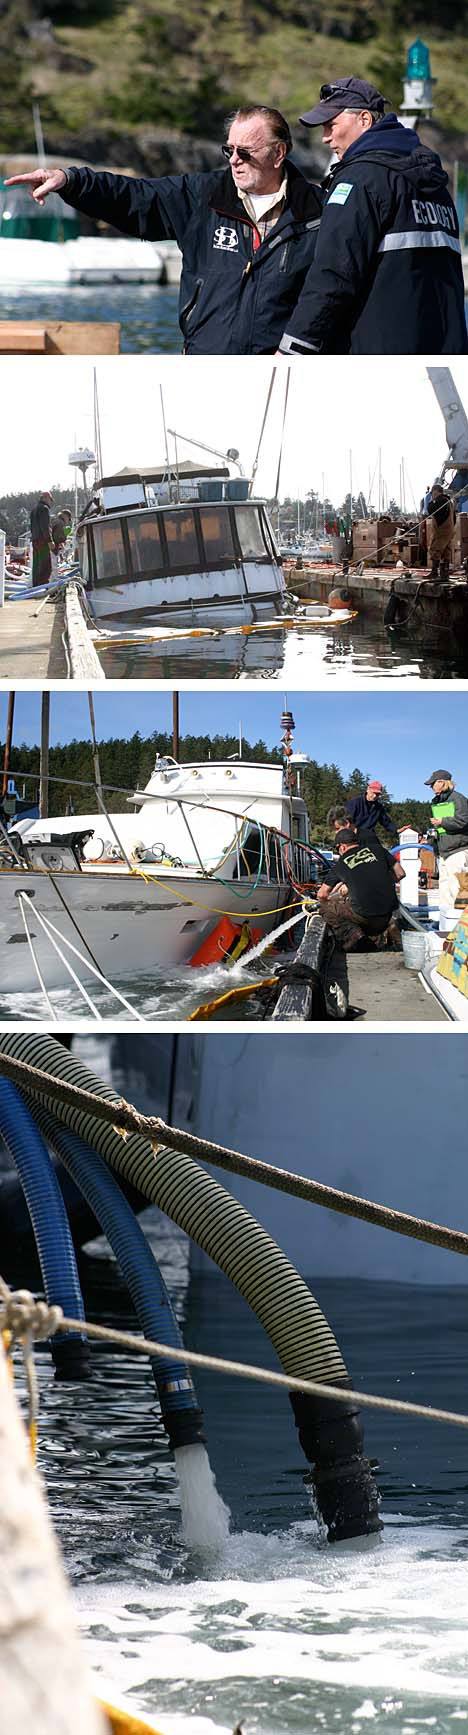 Top photo: Eldorado owner Richard Olin and the Ecology Department's Carl Anderson confer at the site of the boat's raising. Second photo: The Eldorado is raised using a crane and inflatable bags. Third photo: Salvage crew begin pumping water from the boat. Bottom photo: Water is removed from the Eldorado so it can be towed to Cap Sante Marina for repairs.